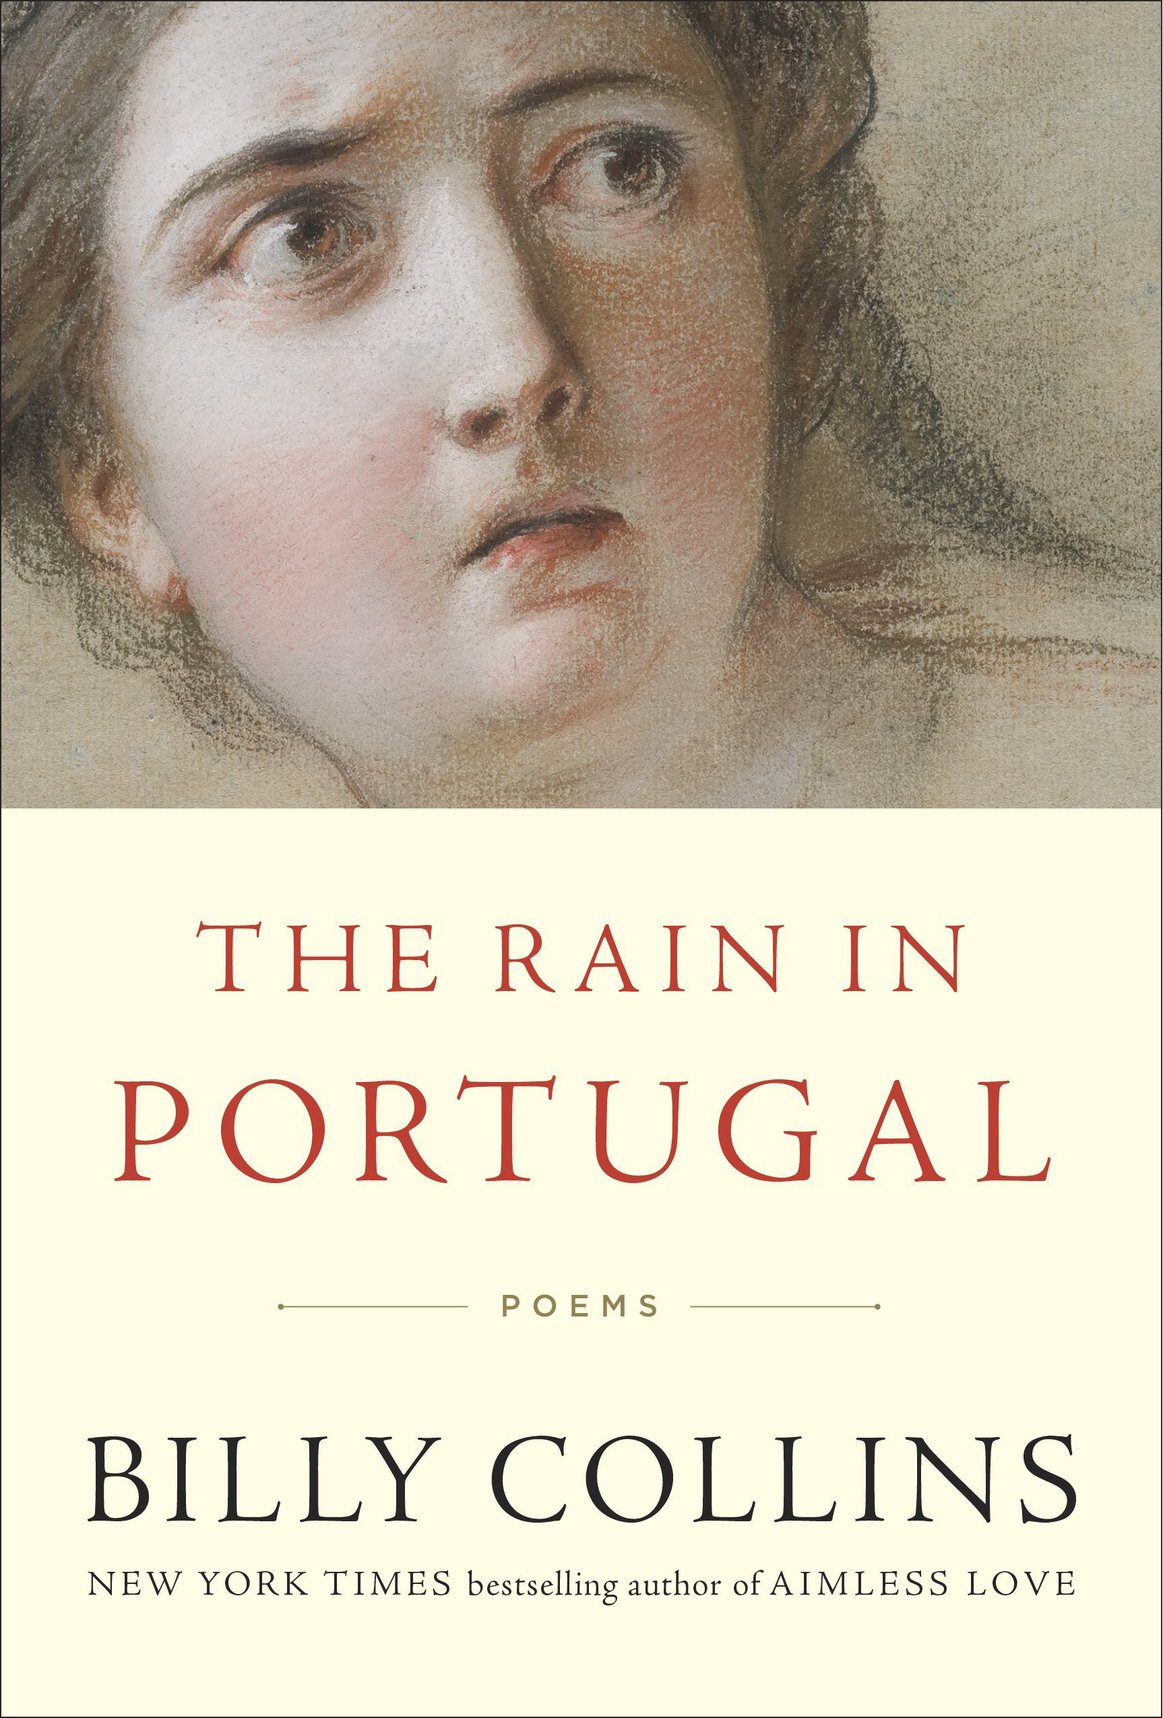 The Rain in Portugal (2016) by Billy Collins